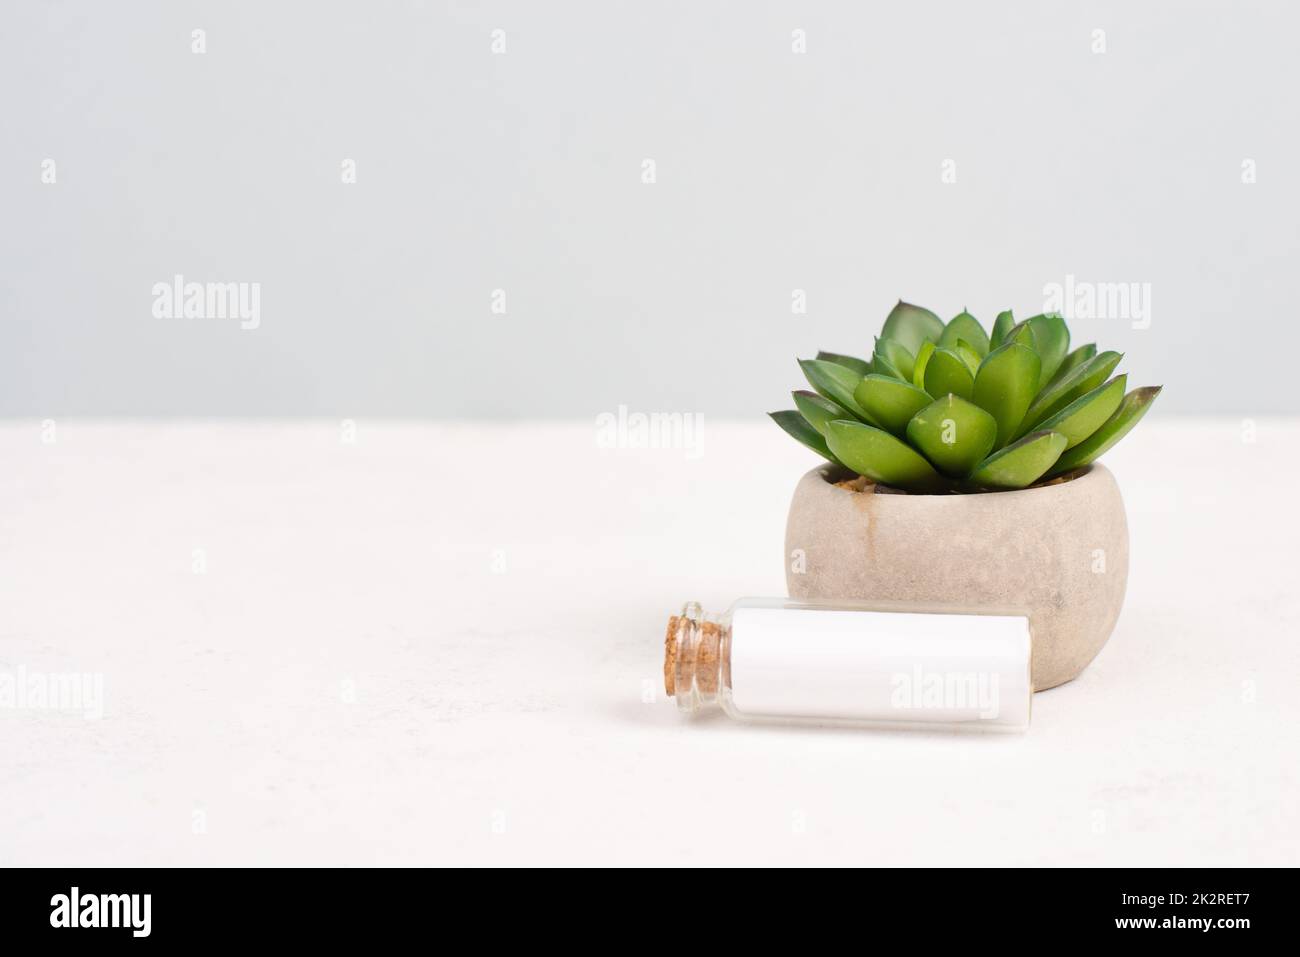 Cactus with an emptybottle for text, in a pot on a gray background, minimalistic decoration, plant at the desk, modern home office, greeting card Stock Photo